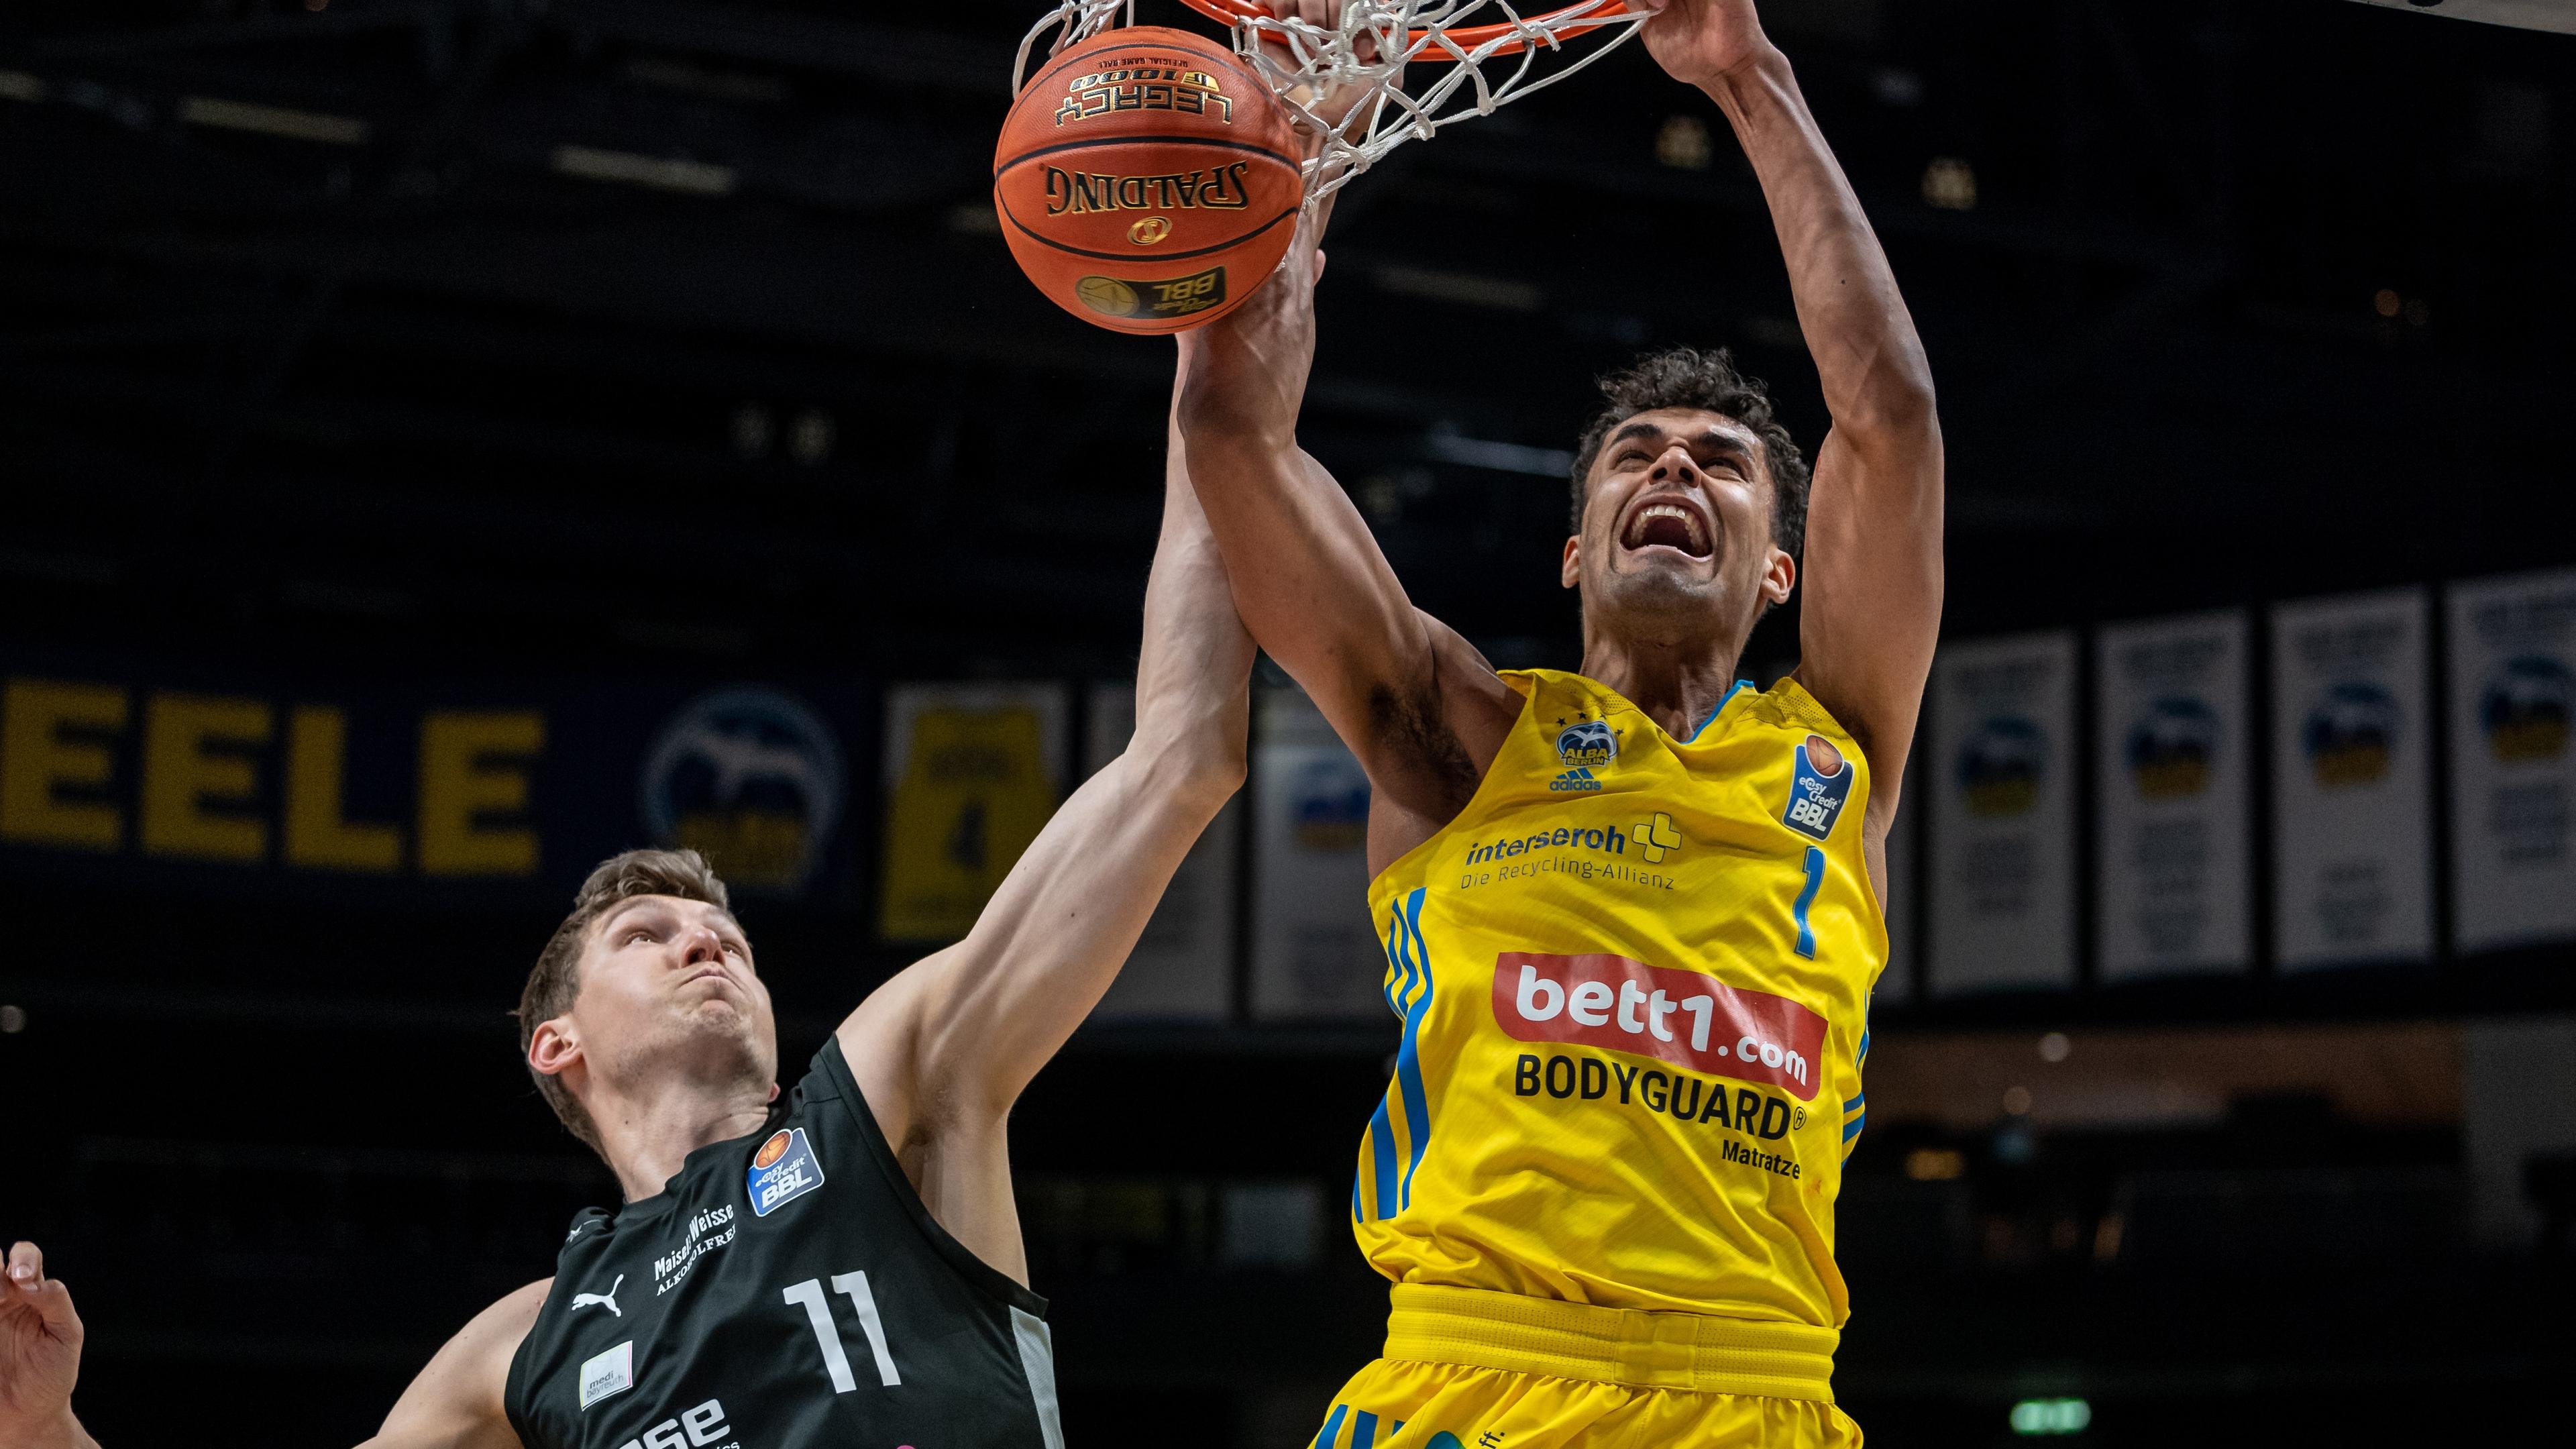 ALBA BERLIN have a lot of history in the easyCredit BBL but 32 straight points is a pretty amazing feat and that is exactly what the two-time reigning champs did against medi bayreuth to close the game. Things were much more suspenseful with MHP RIESEN Ludwigsburg who got a late game-winner from Jonah Radebaugh while Brose Bamberg remained alive in the playoffs hunt with two big wins.